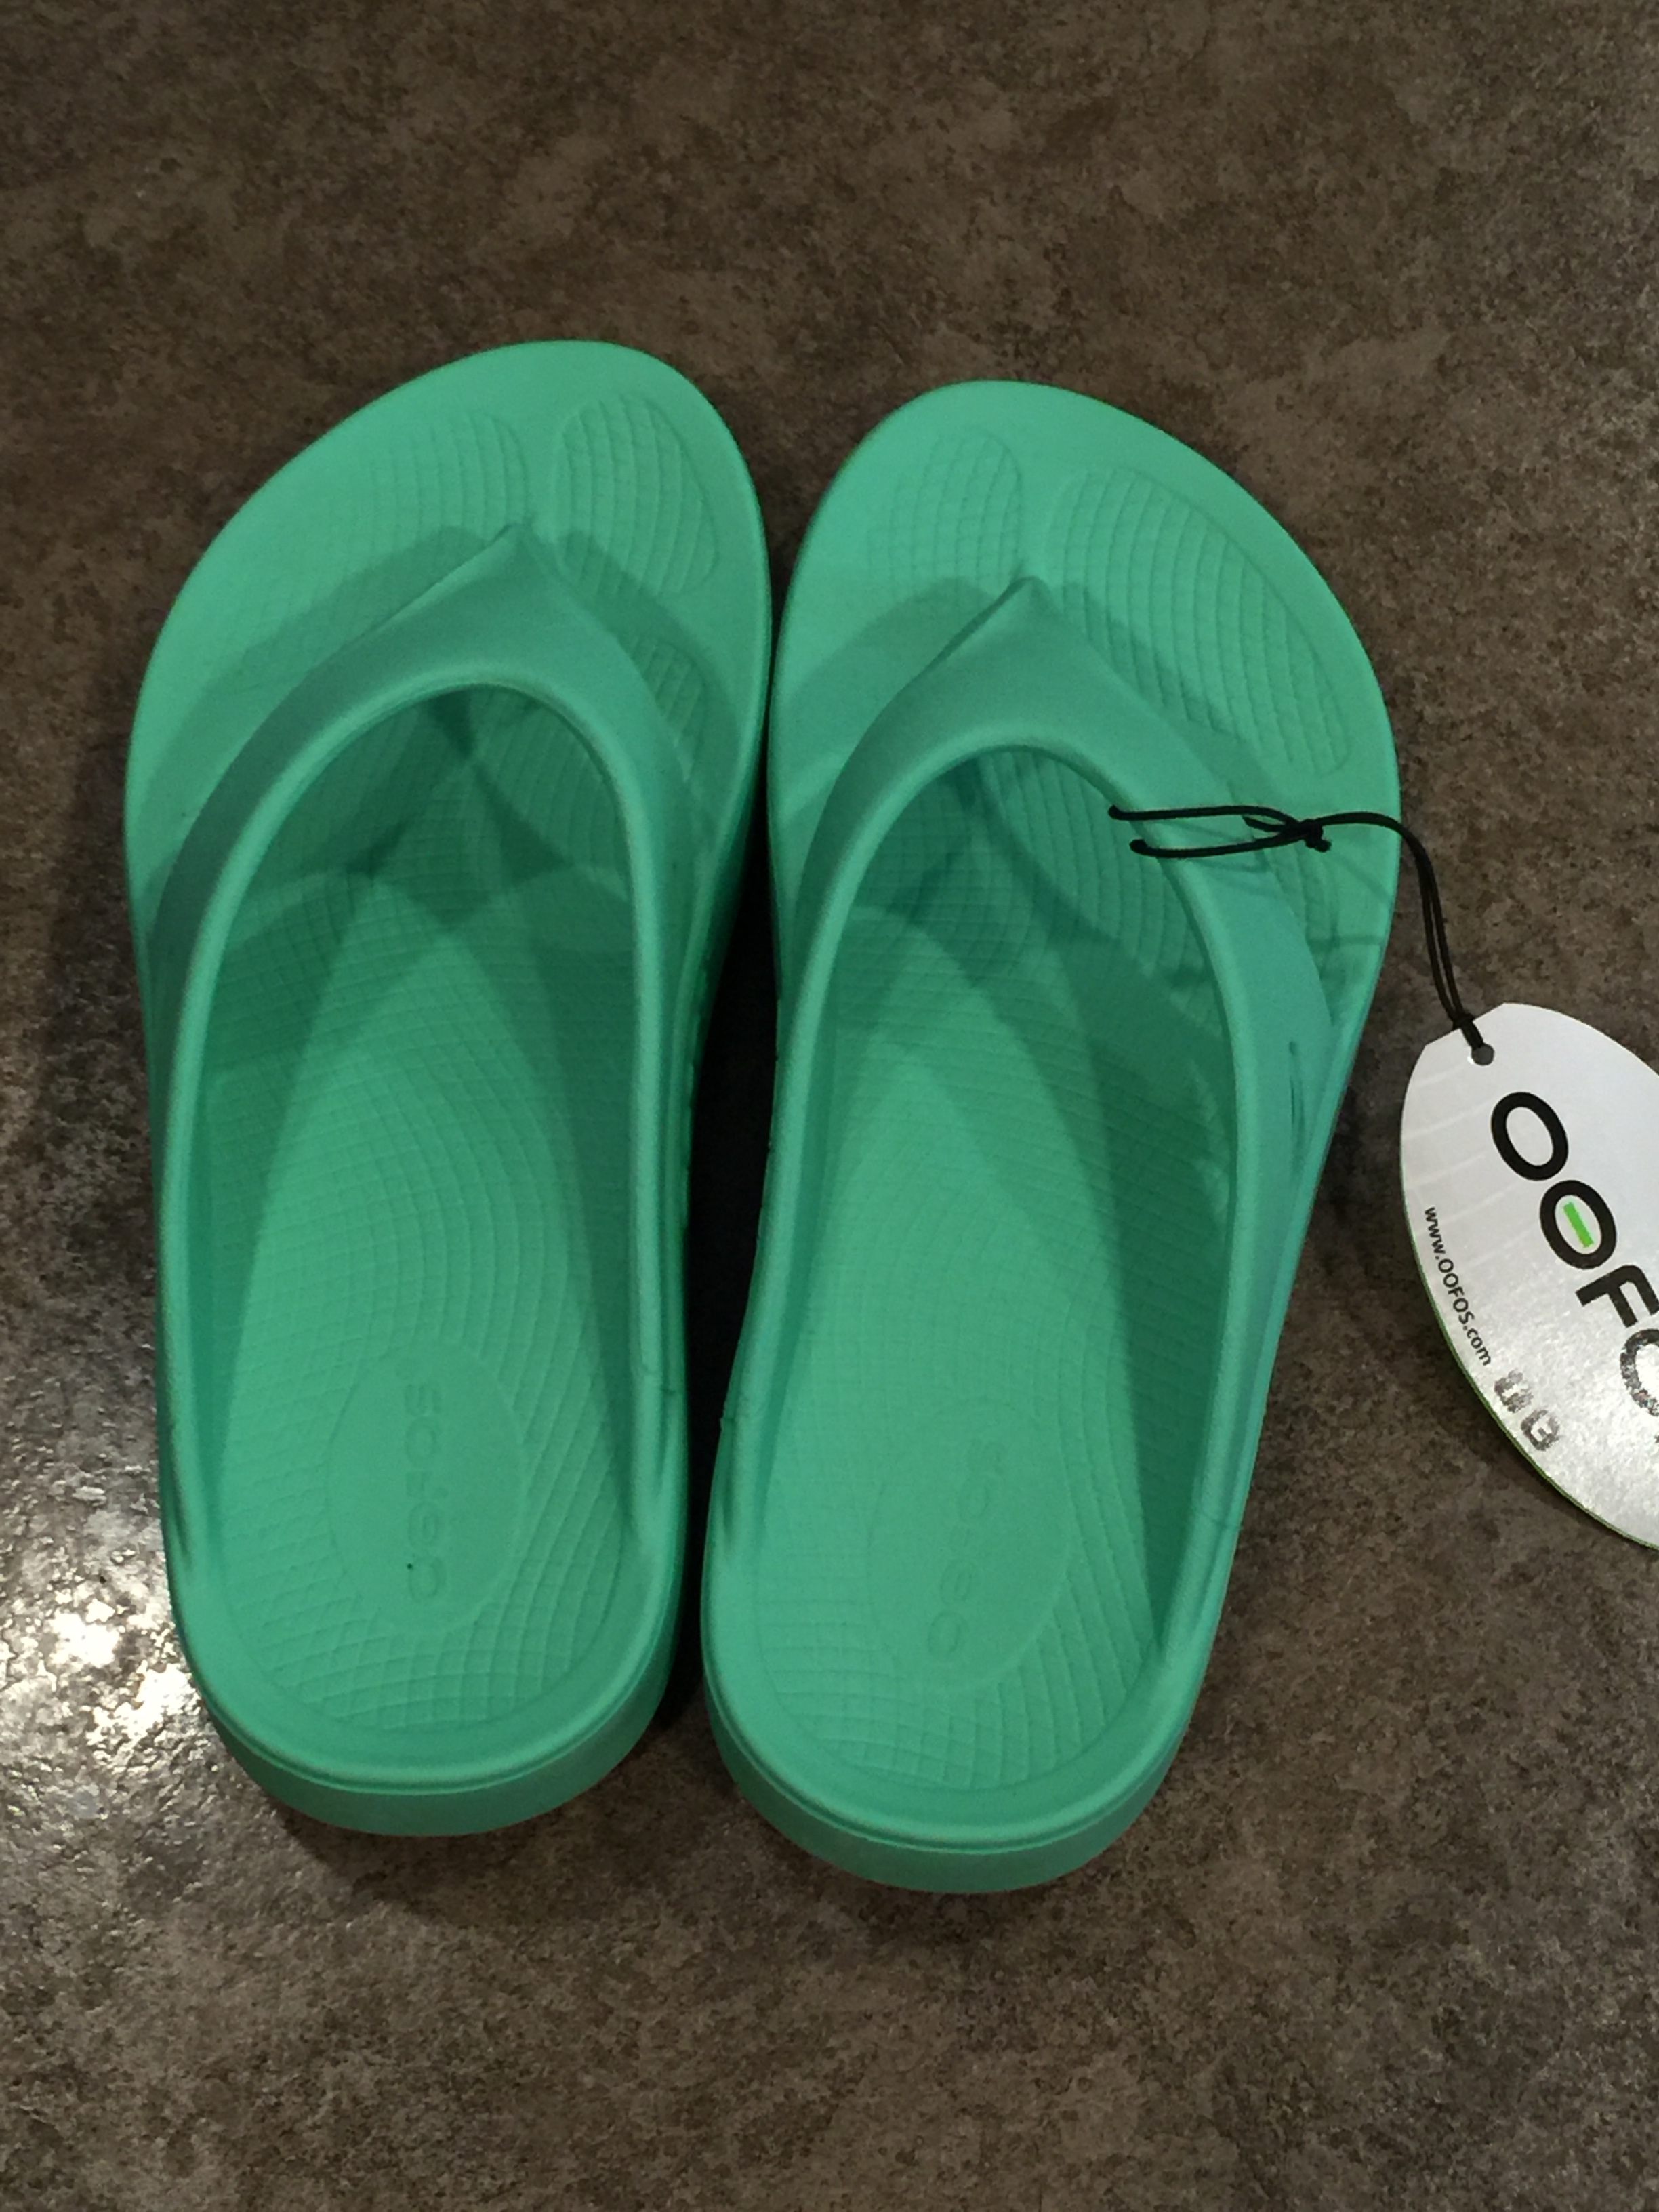 OOfos Sandals Review and a Giveaway 